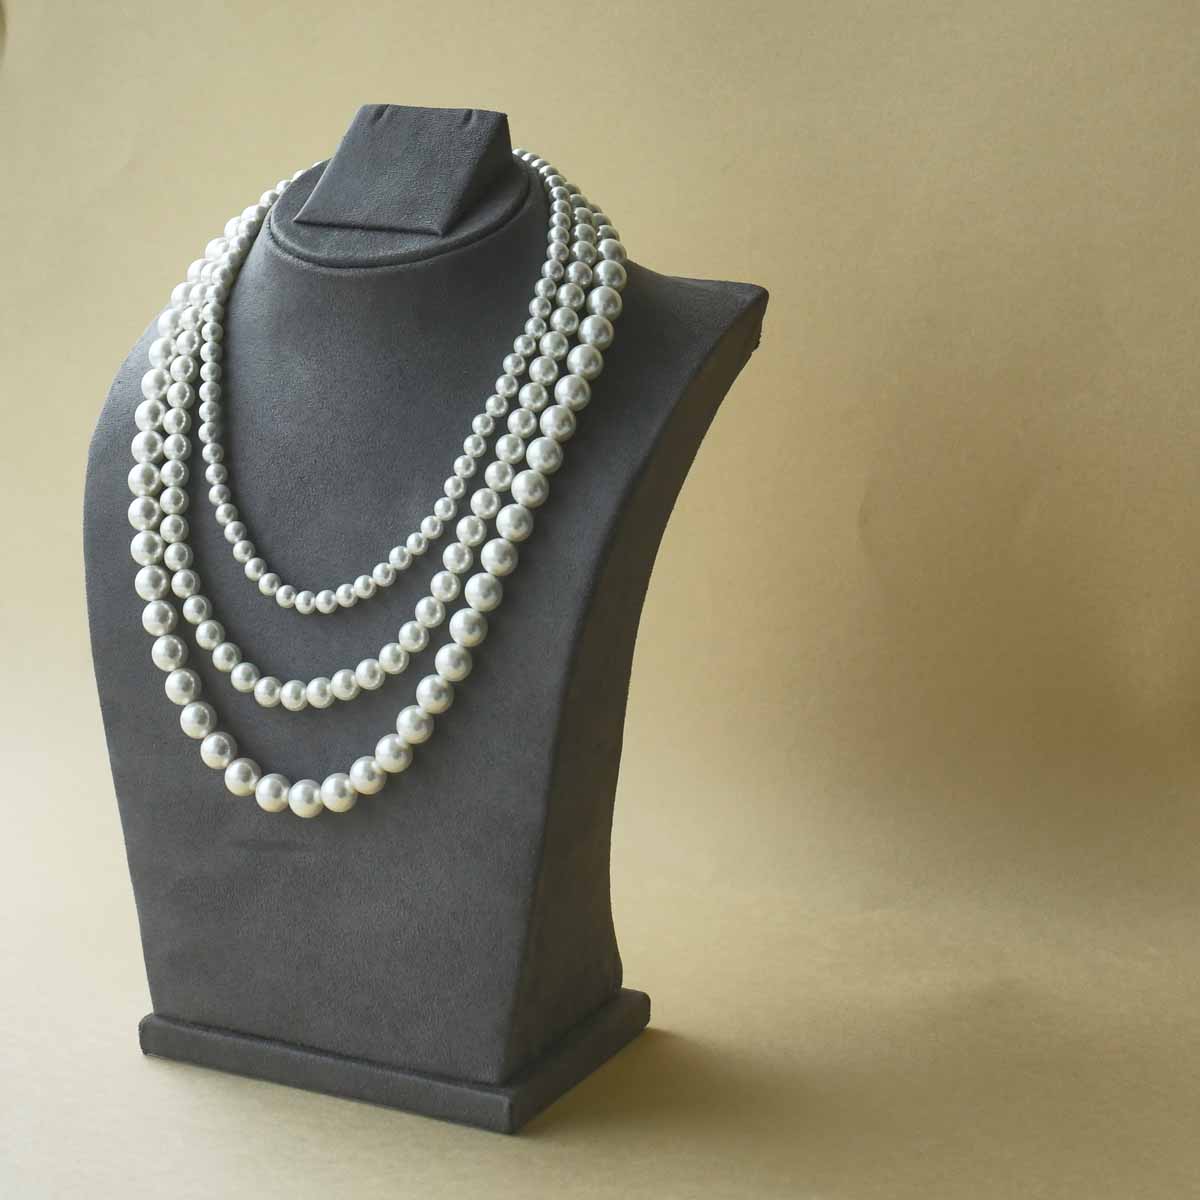 Large Pearl Teardrop Necklace with Pave Diamonds | Jewelry Artisans